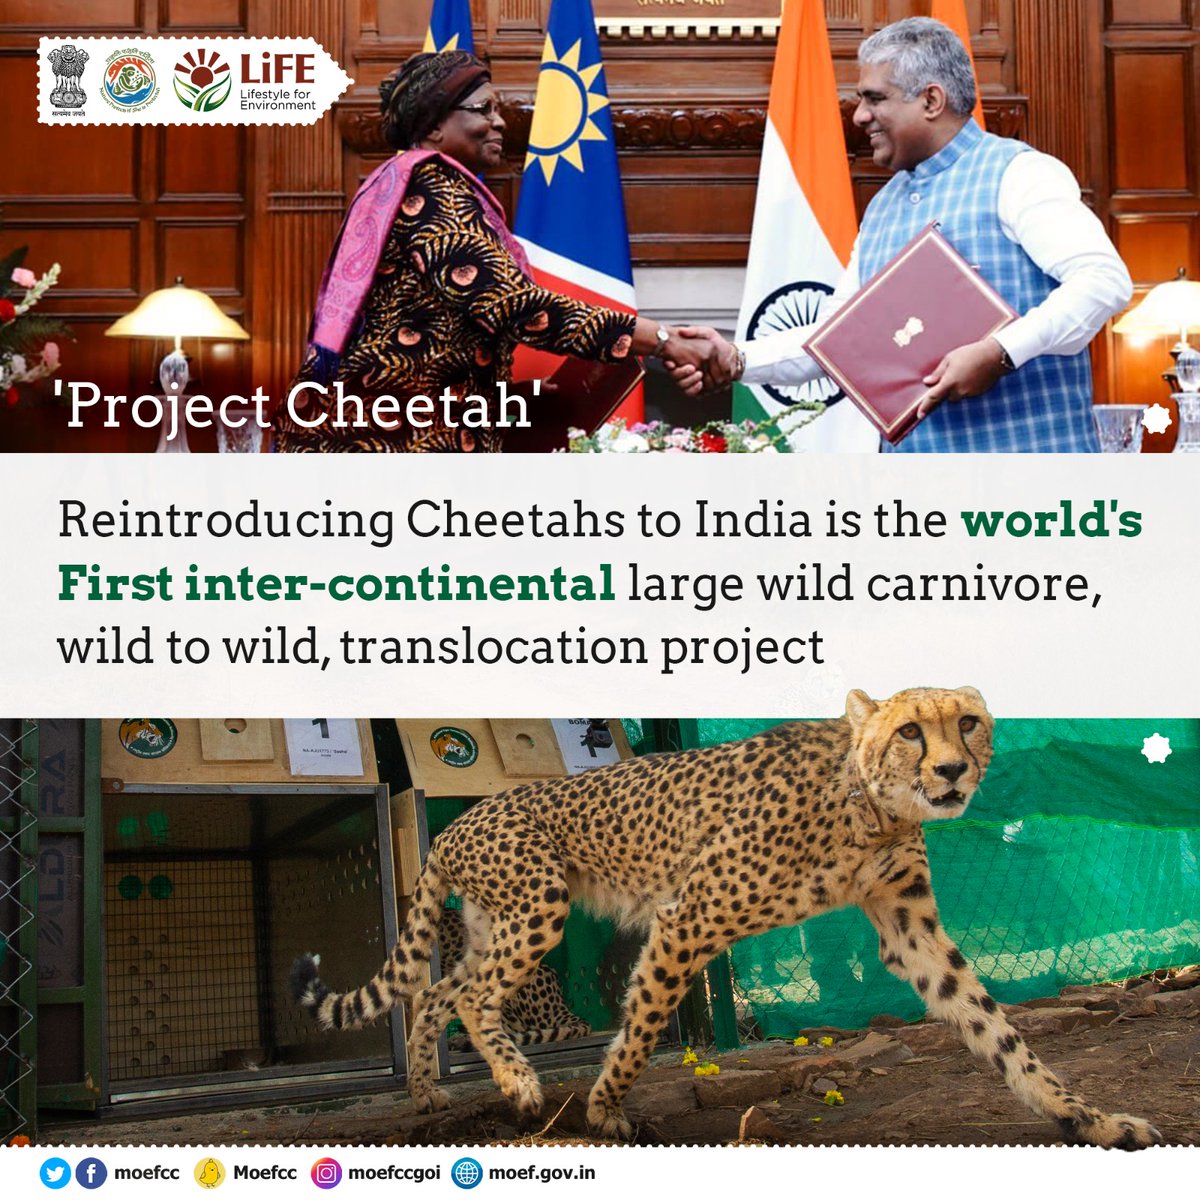 '𝐏𝐫𝐨𝐣𝐞𝐜𝐭 𝐂𝐡𝐞𝐞𝐭𝐚𝐡': The 𝐖𝐨𝐫𝐥𝐝'𝐬 𝟏𝐬𝐭 Inter-continental large wild carnivore, wild to wild translocation Project.
#ProPlanetPeople 
#PrakritiKaKhayal